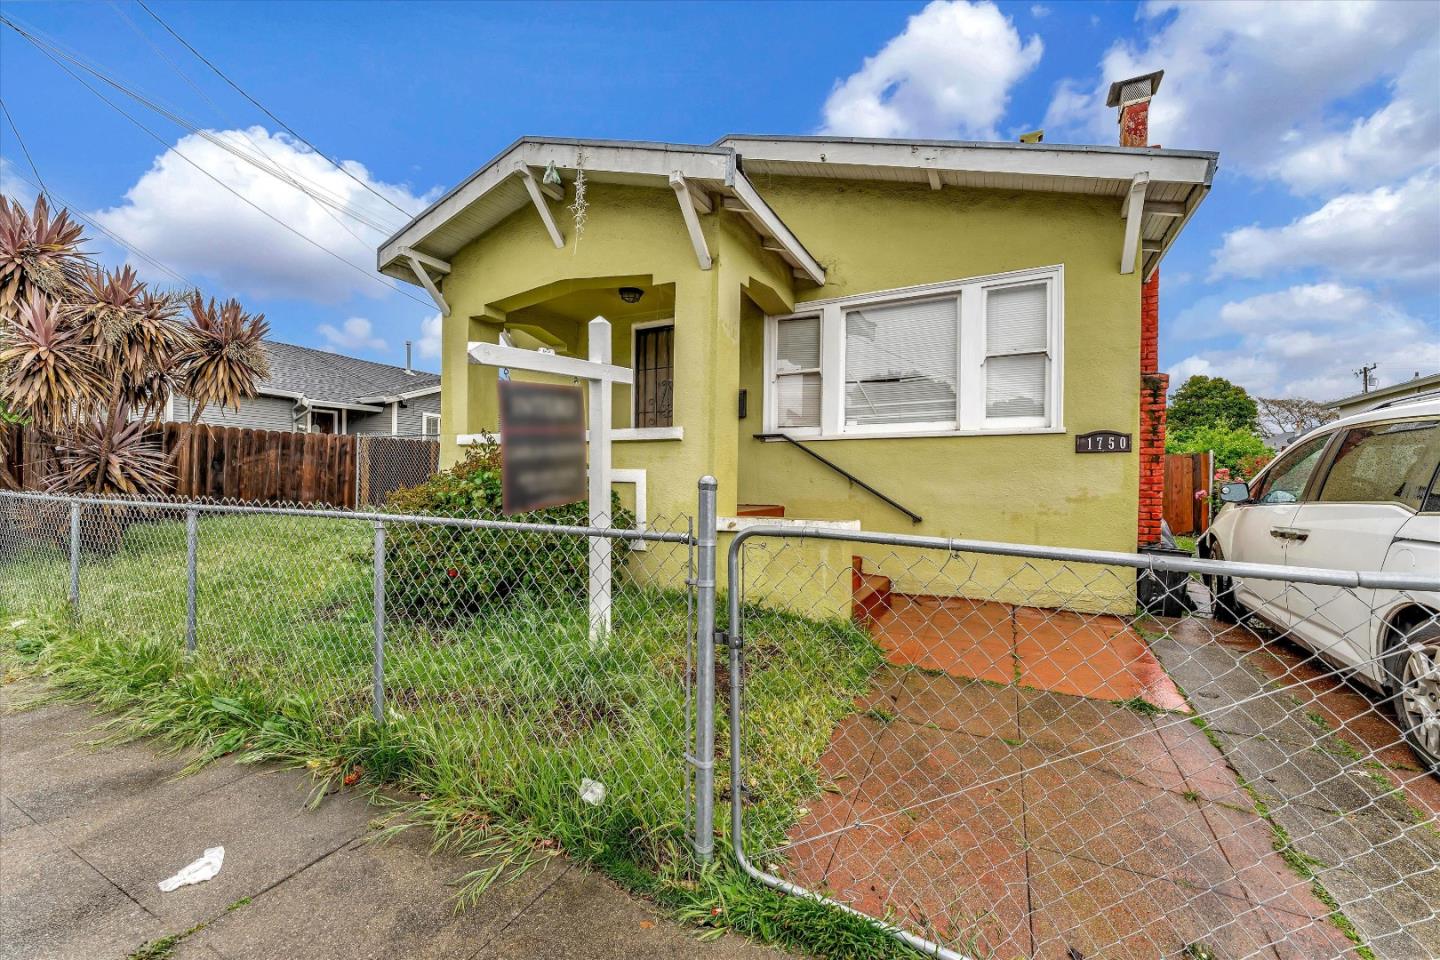 Photo of 1750 101st Ave in Oakland, CA